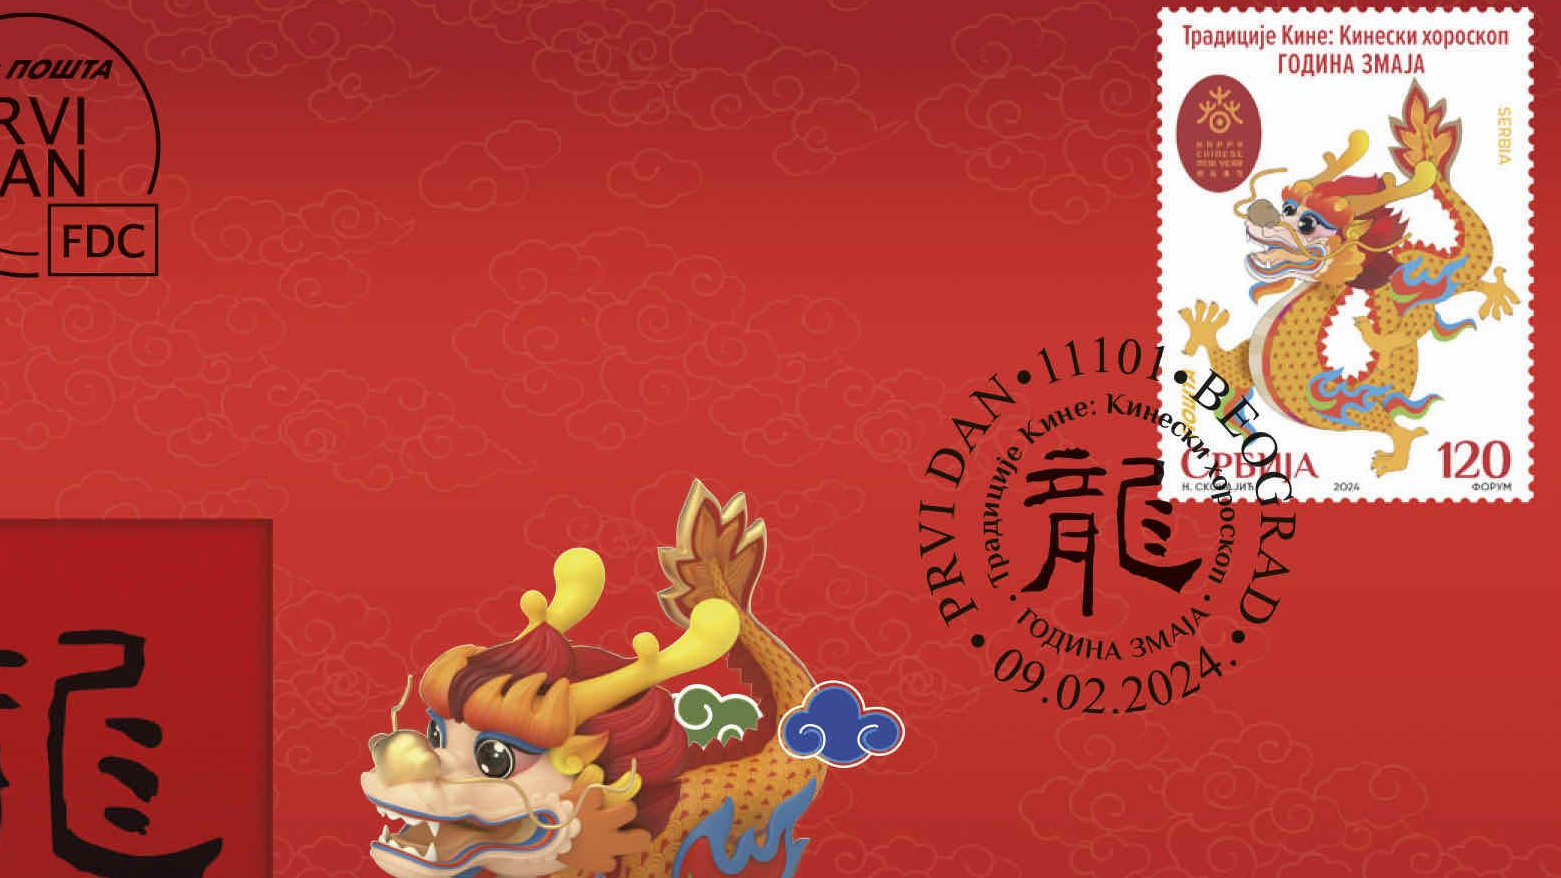 The Serbian postal service has issued a new stamp to mark the Chinese New Year. It's the start of a run of stamps celebrating the festival that will go on for the next 12 years. /CGTN